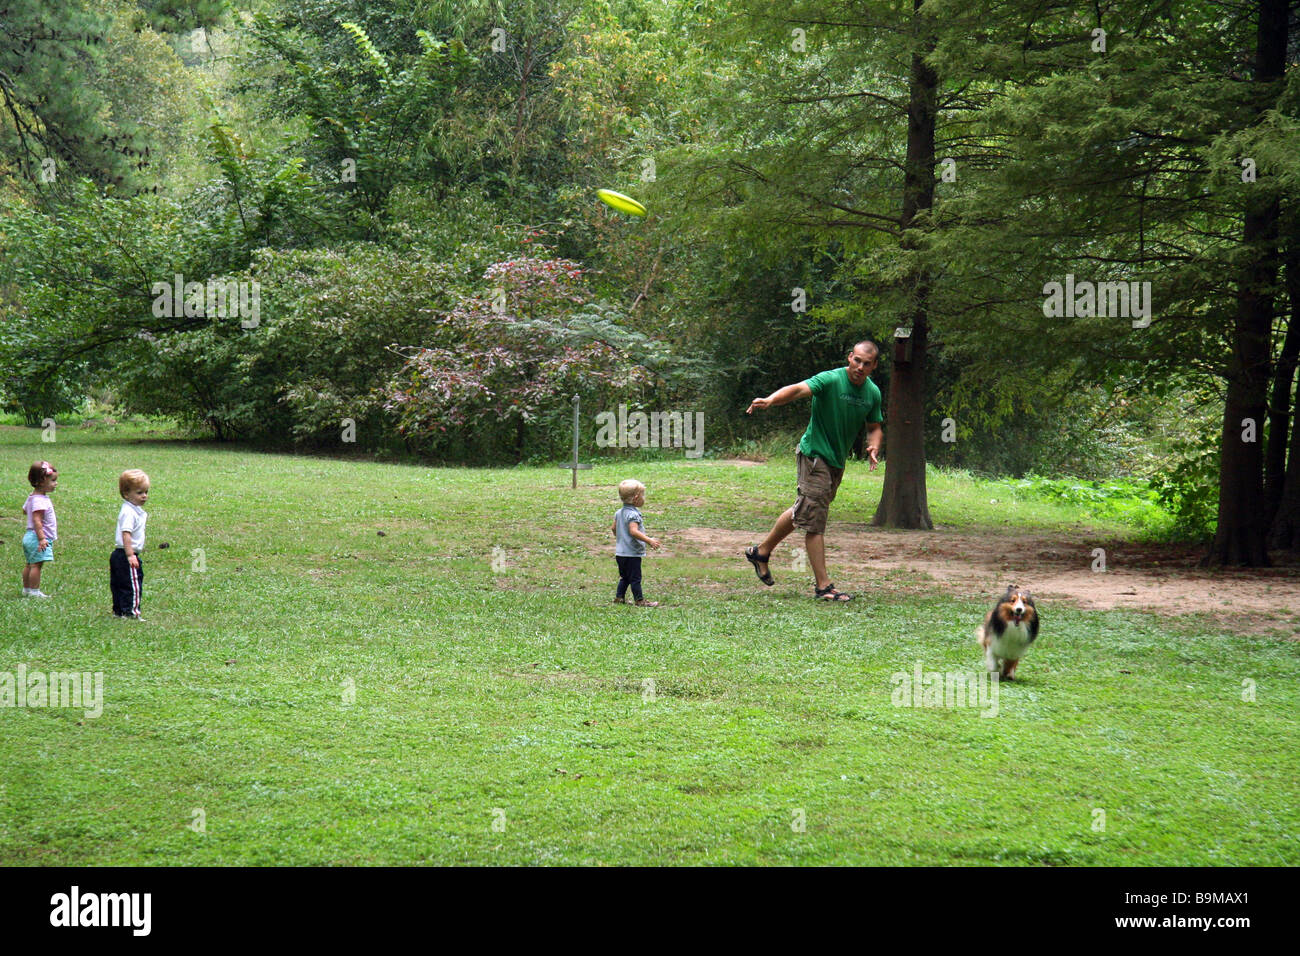 Children watching a young man play frisbee with his dog at the park. Stock Photo